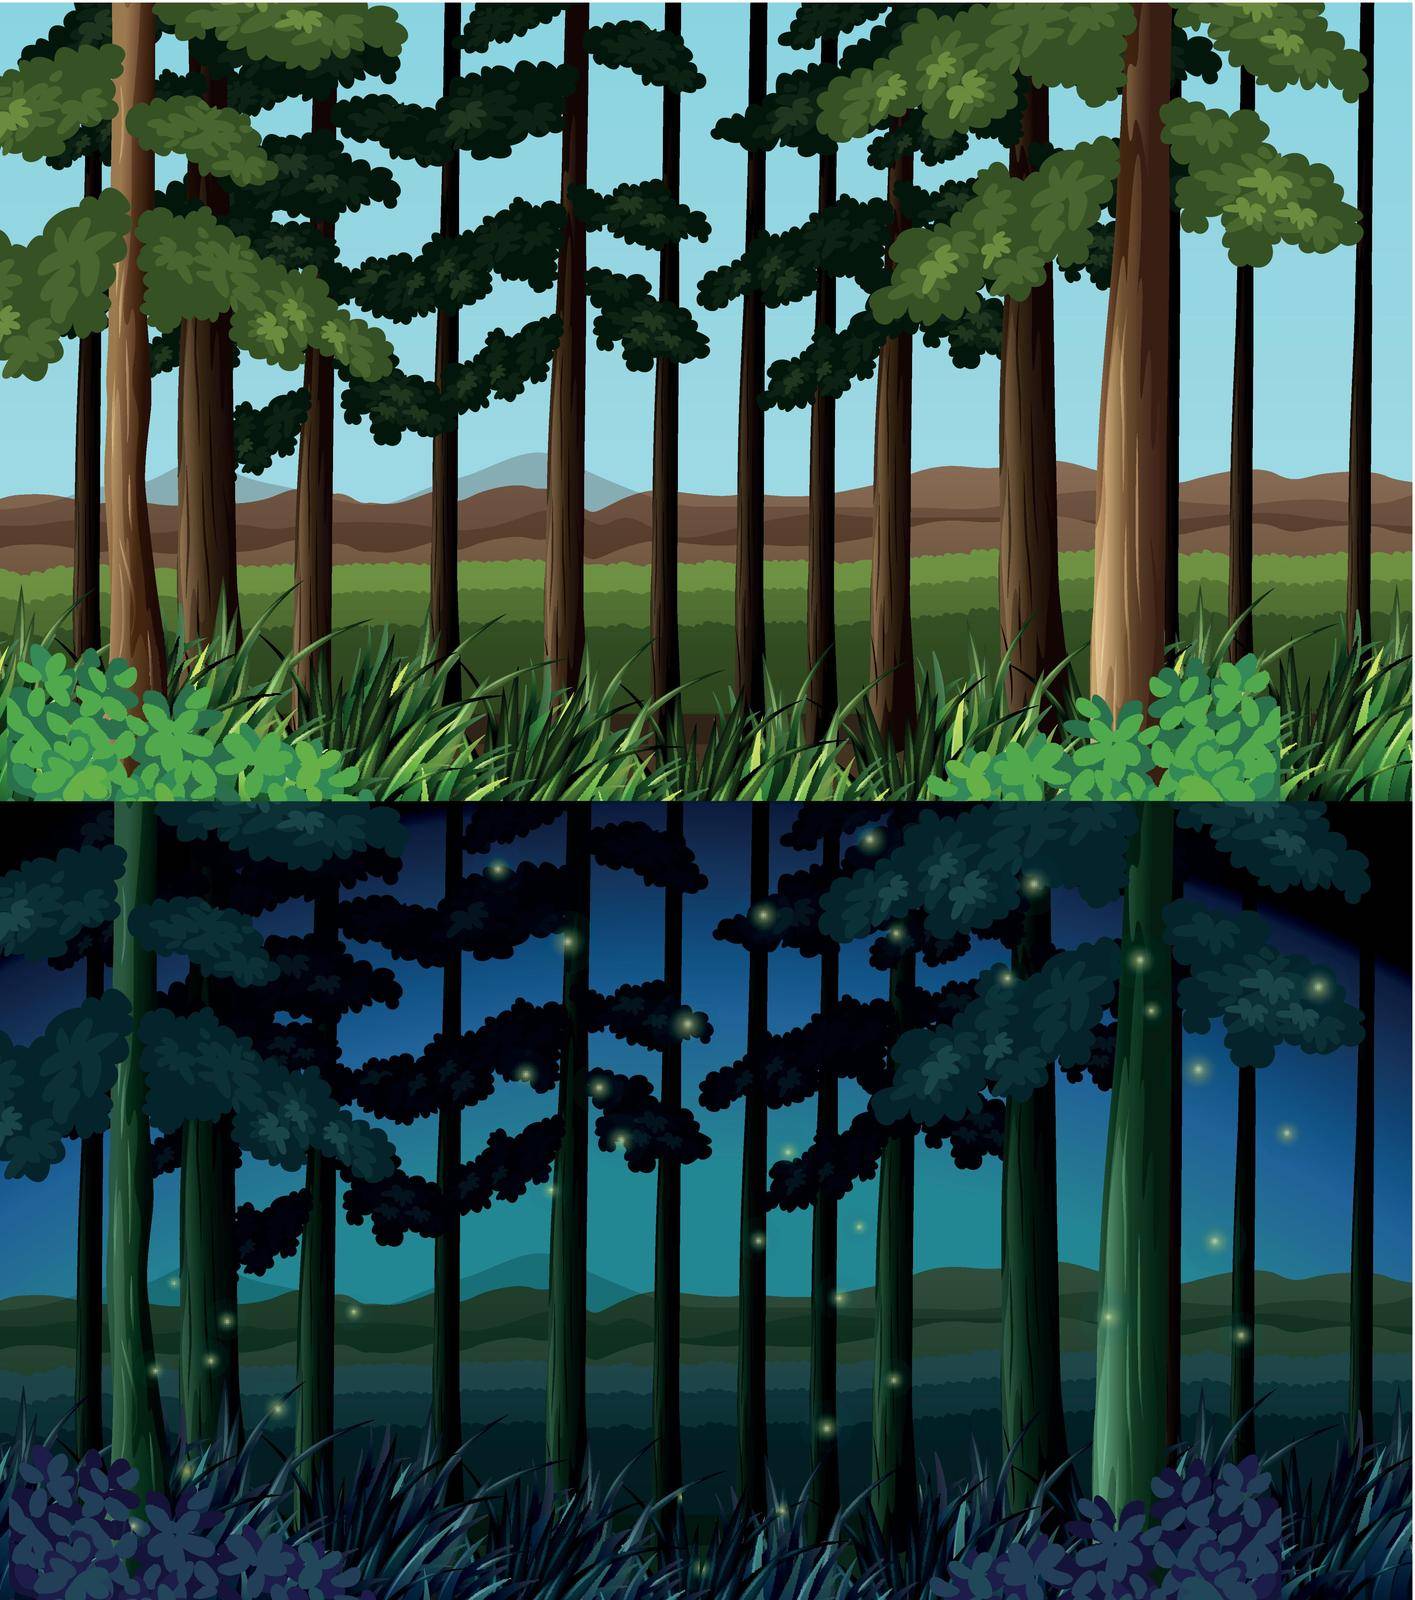 Forest scene at day time and night time illustration